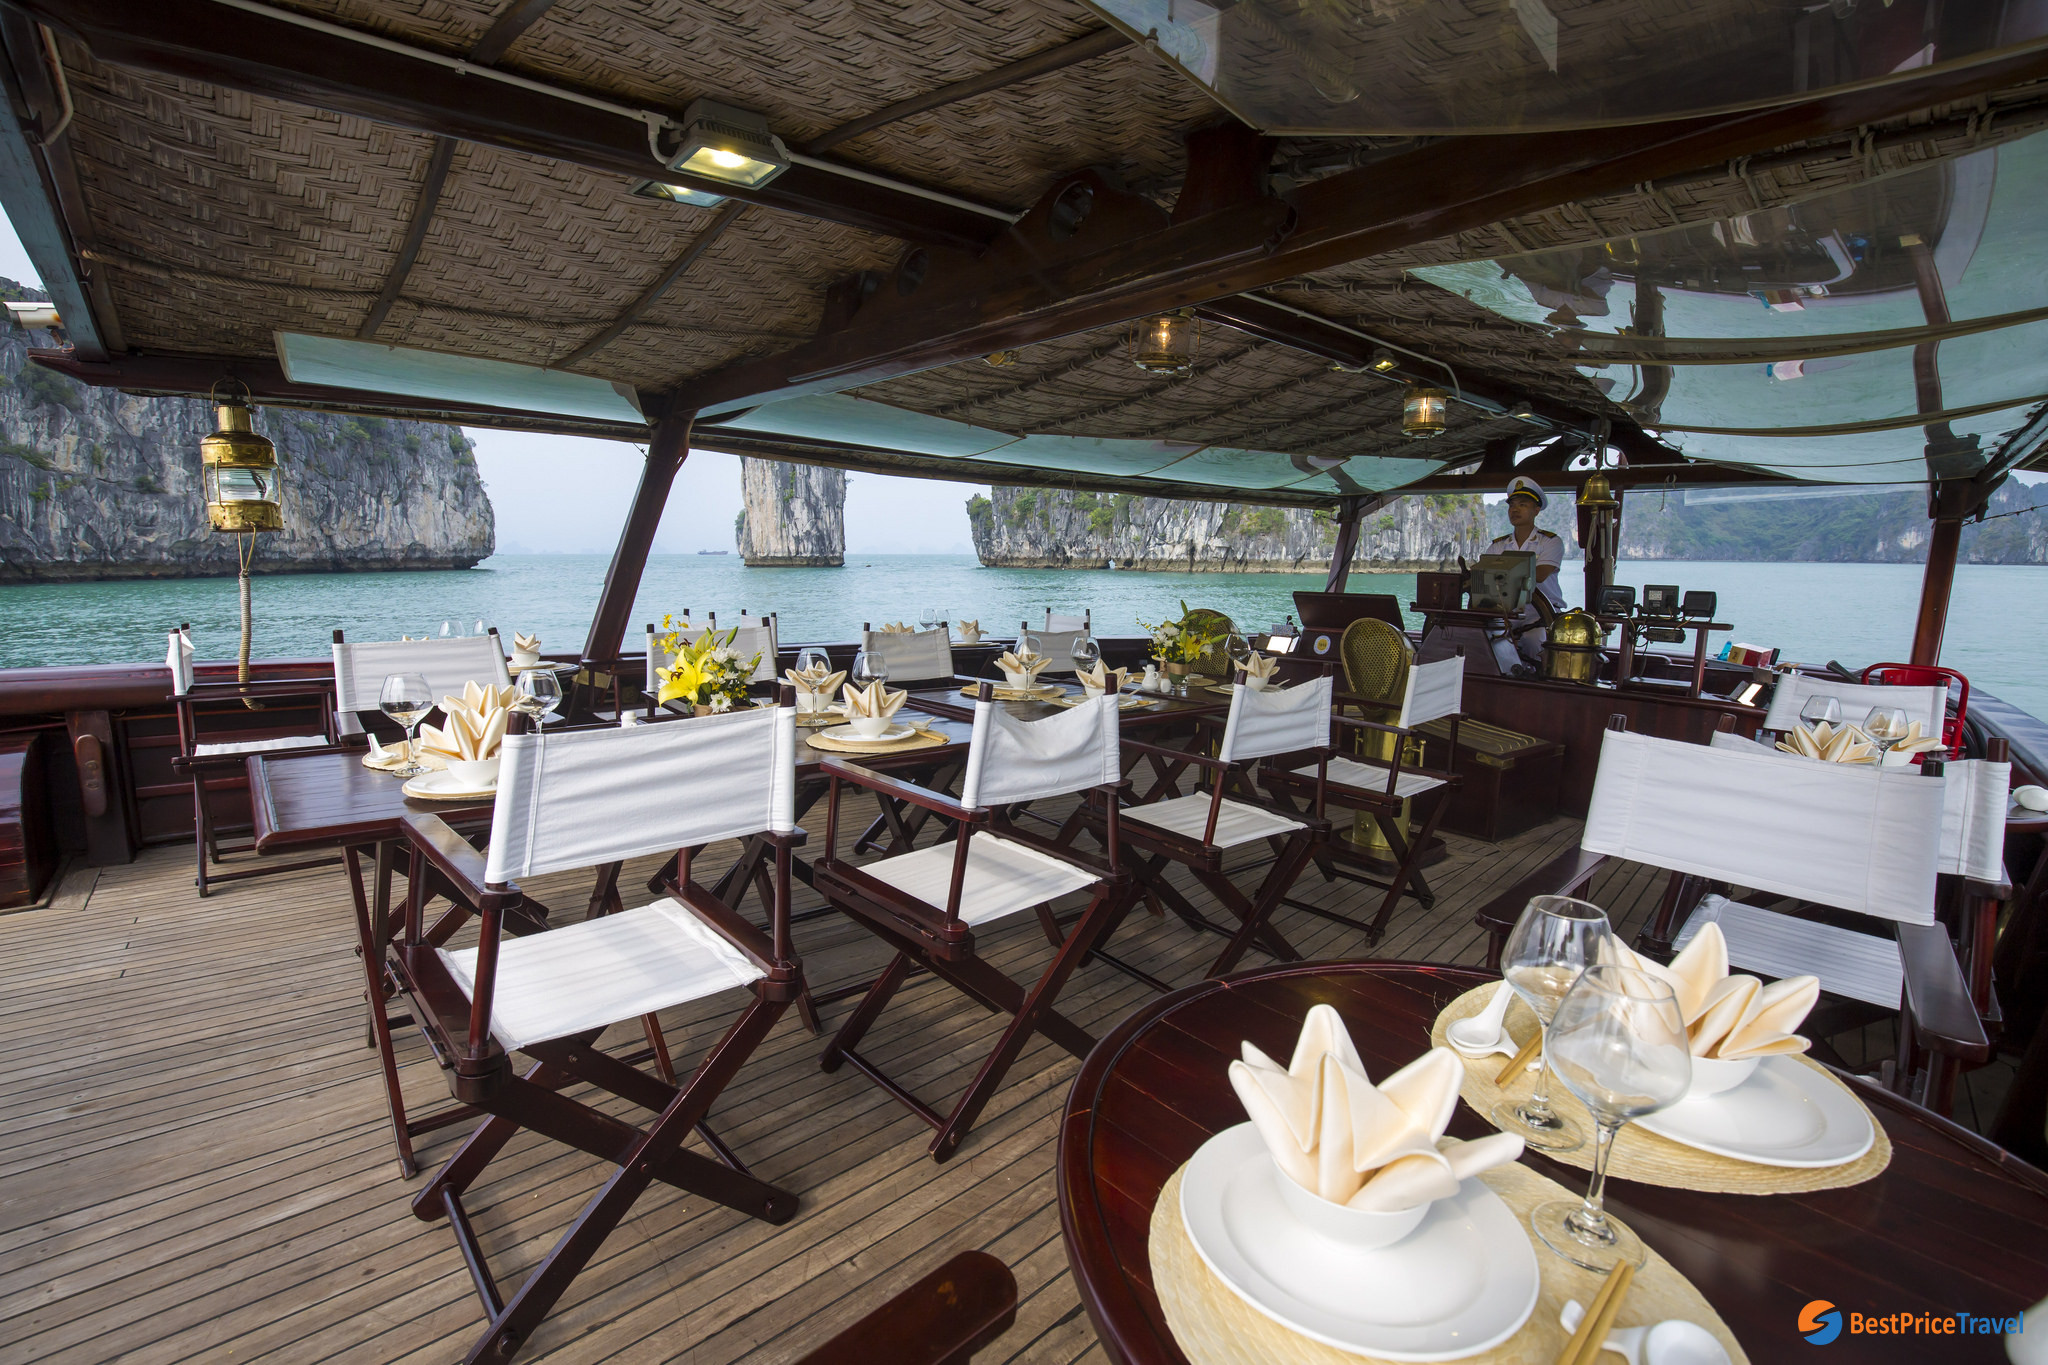 The open-air restaurant with a breathtaking bay view